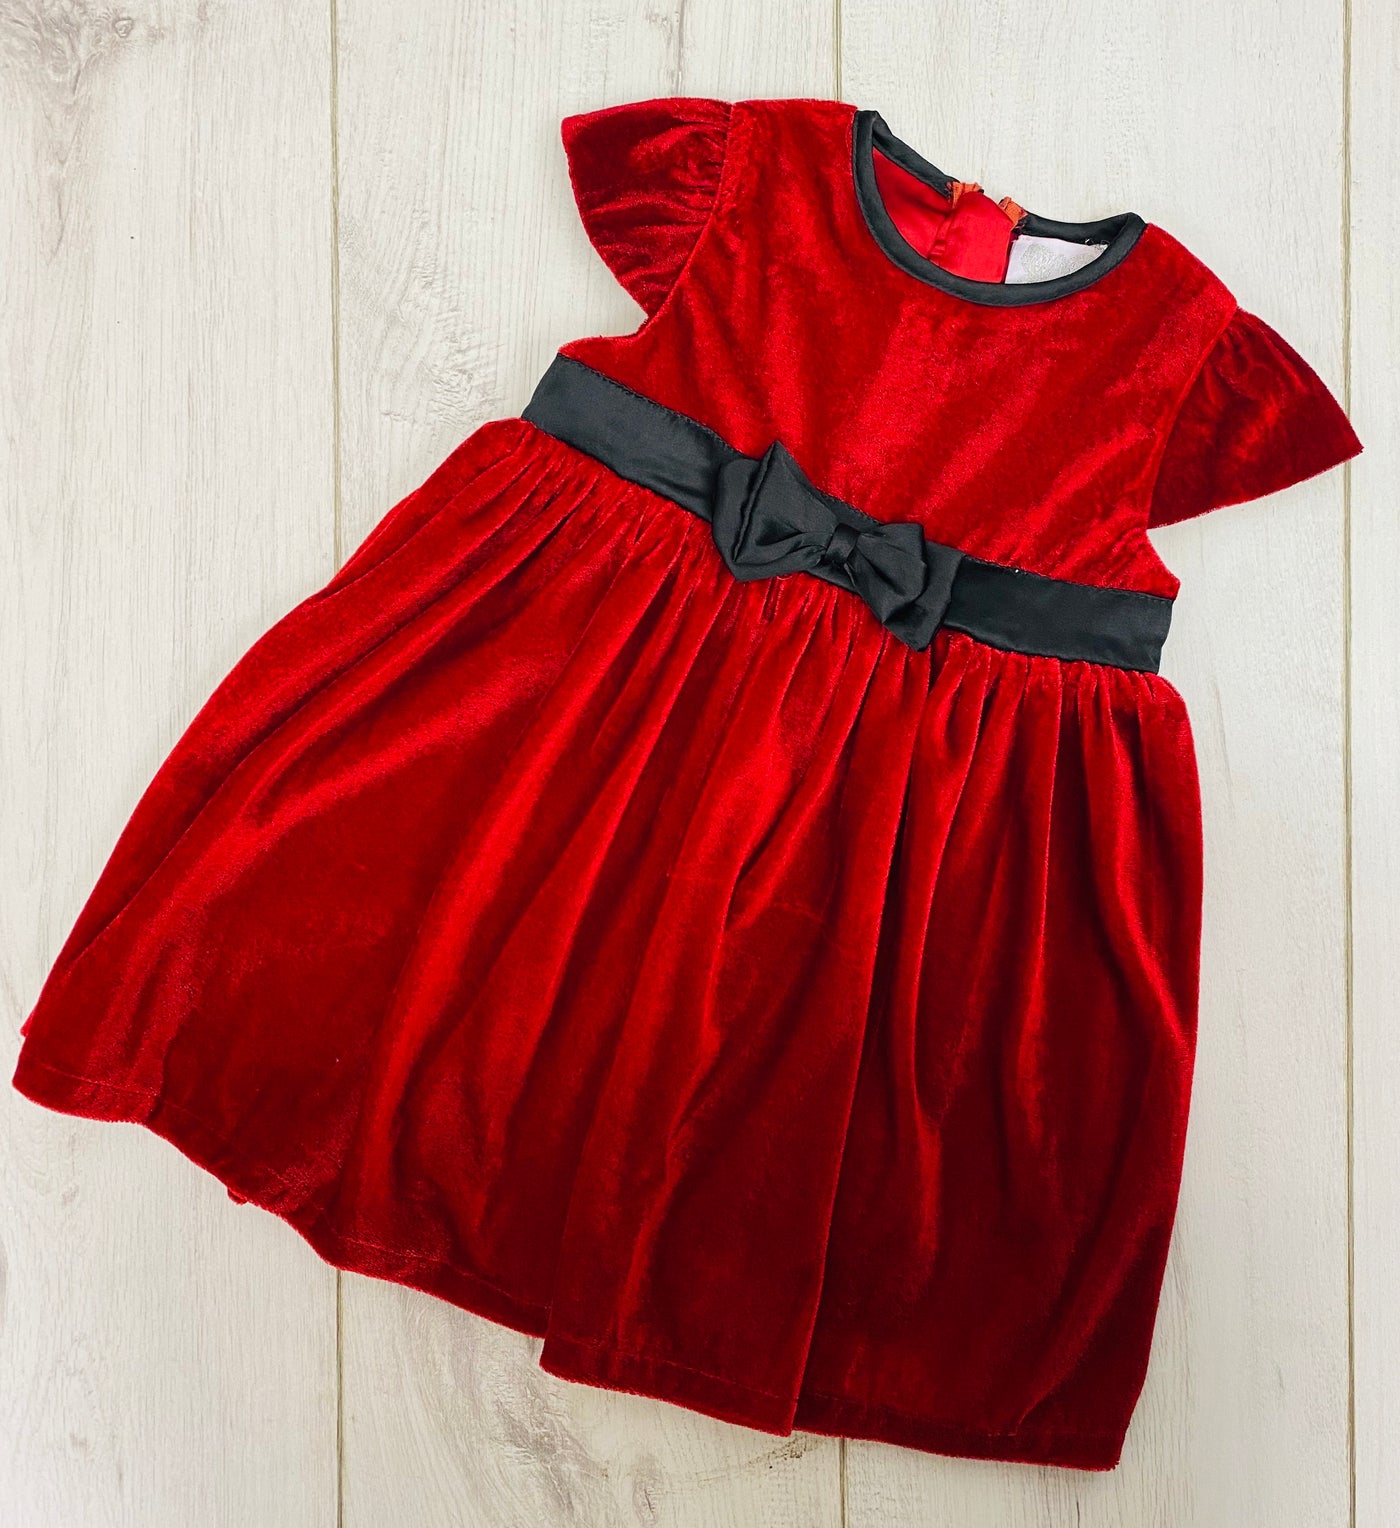 Girls Red Velour Dress with Black Bow detail